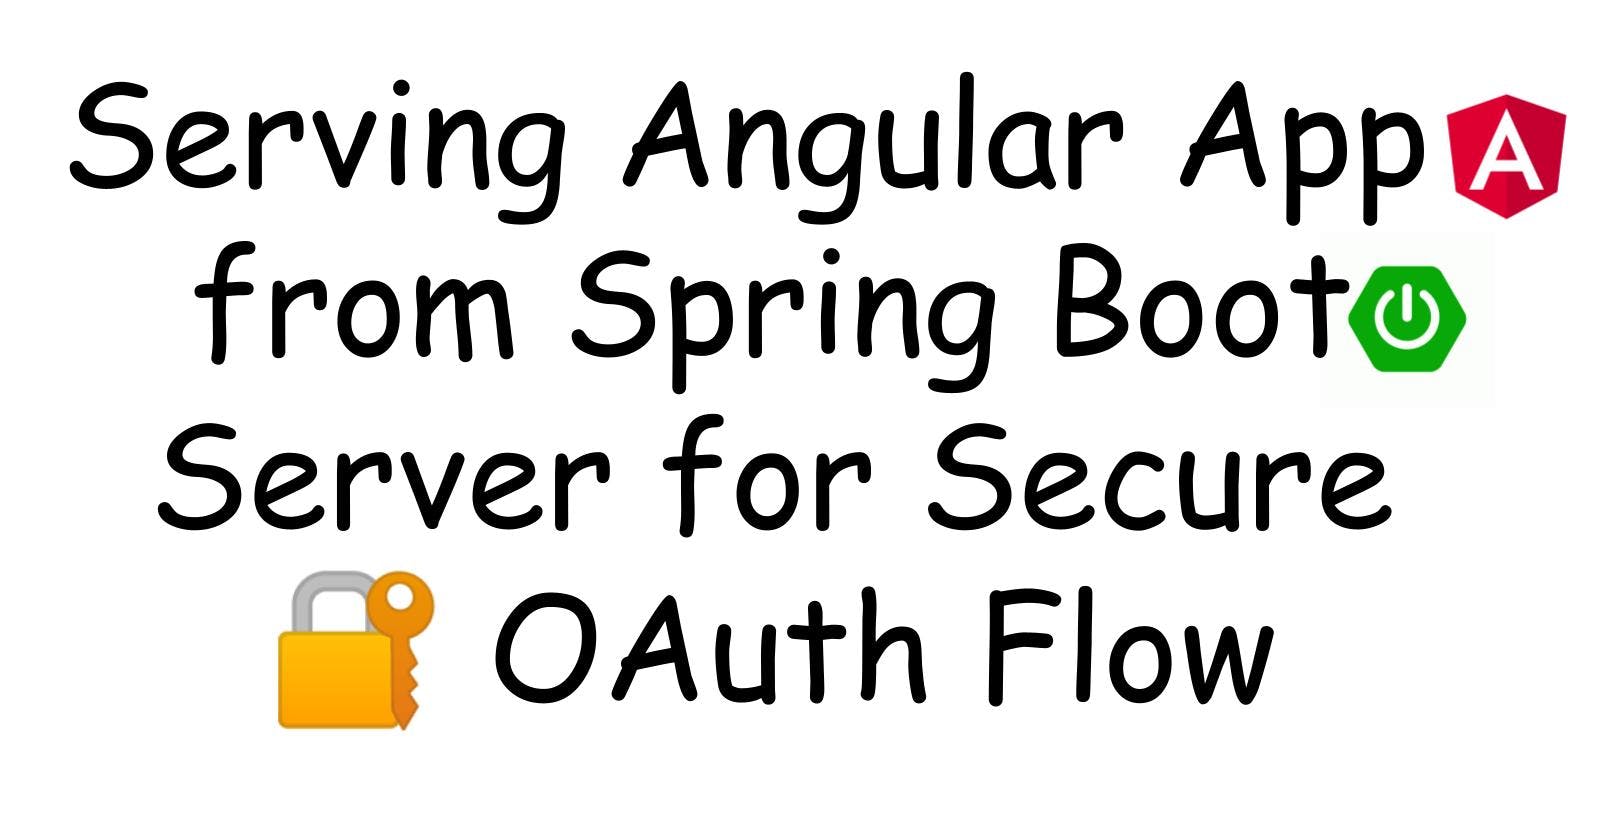 Serving Angular App from Spring Boot Server for Secure 🔐 OAuth Flow